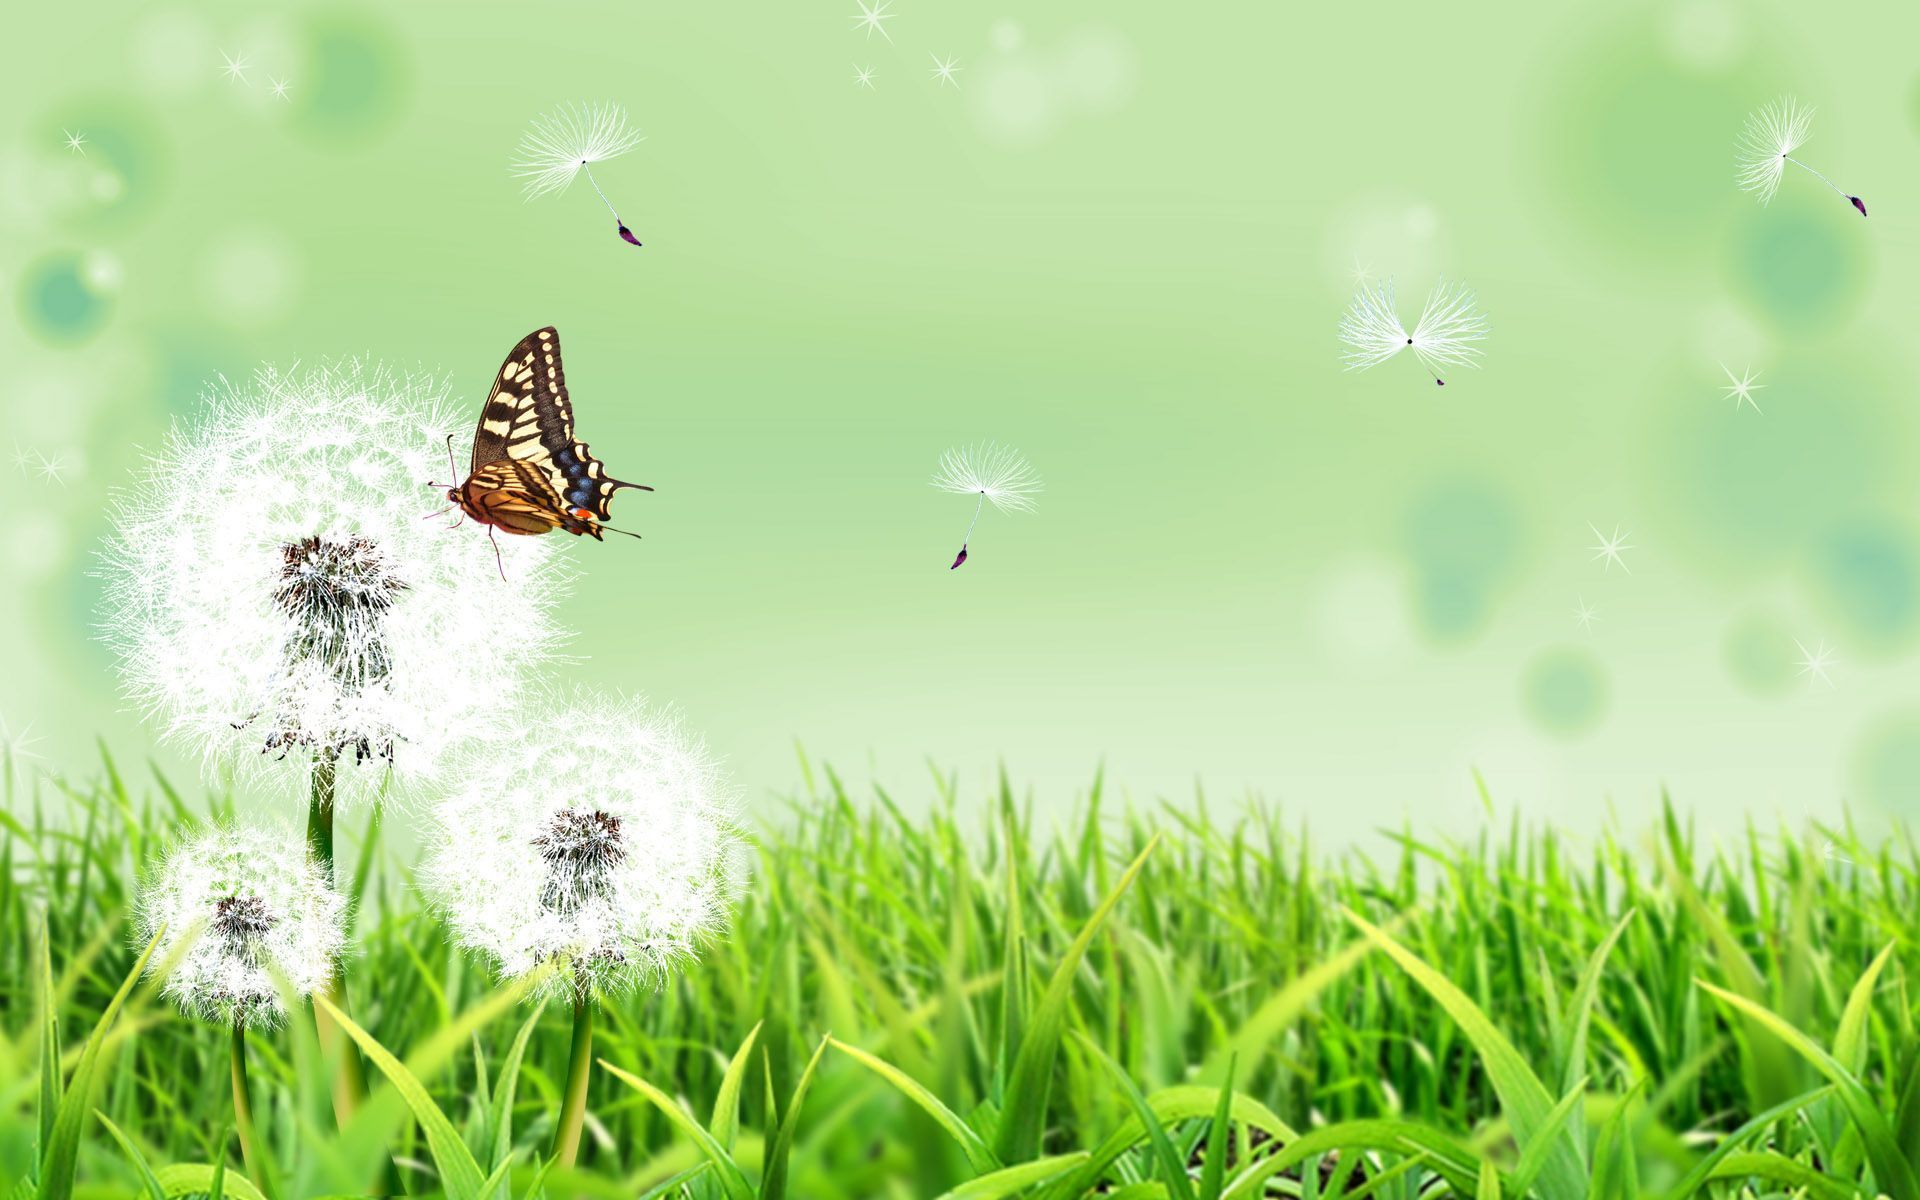 Free Wallpaper Of Natural Scenery: A Brown Butterfly Flying In The ...